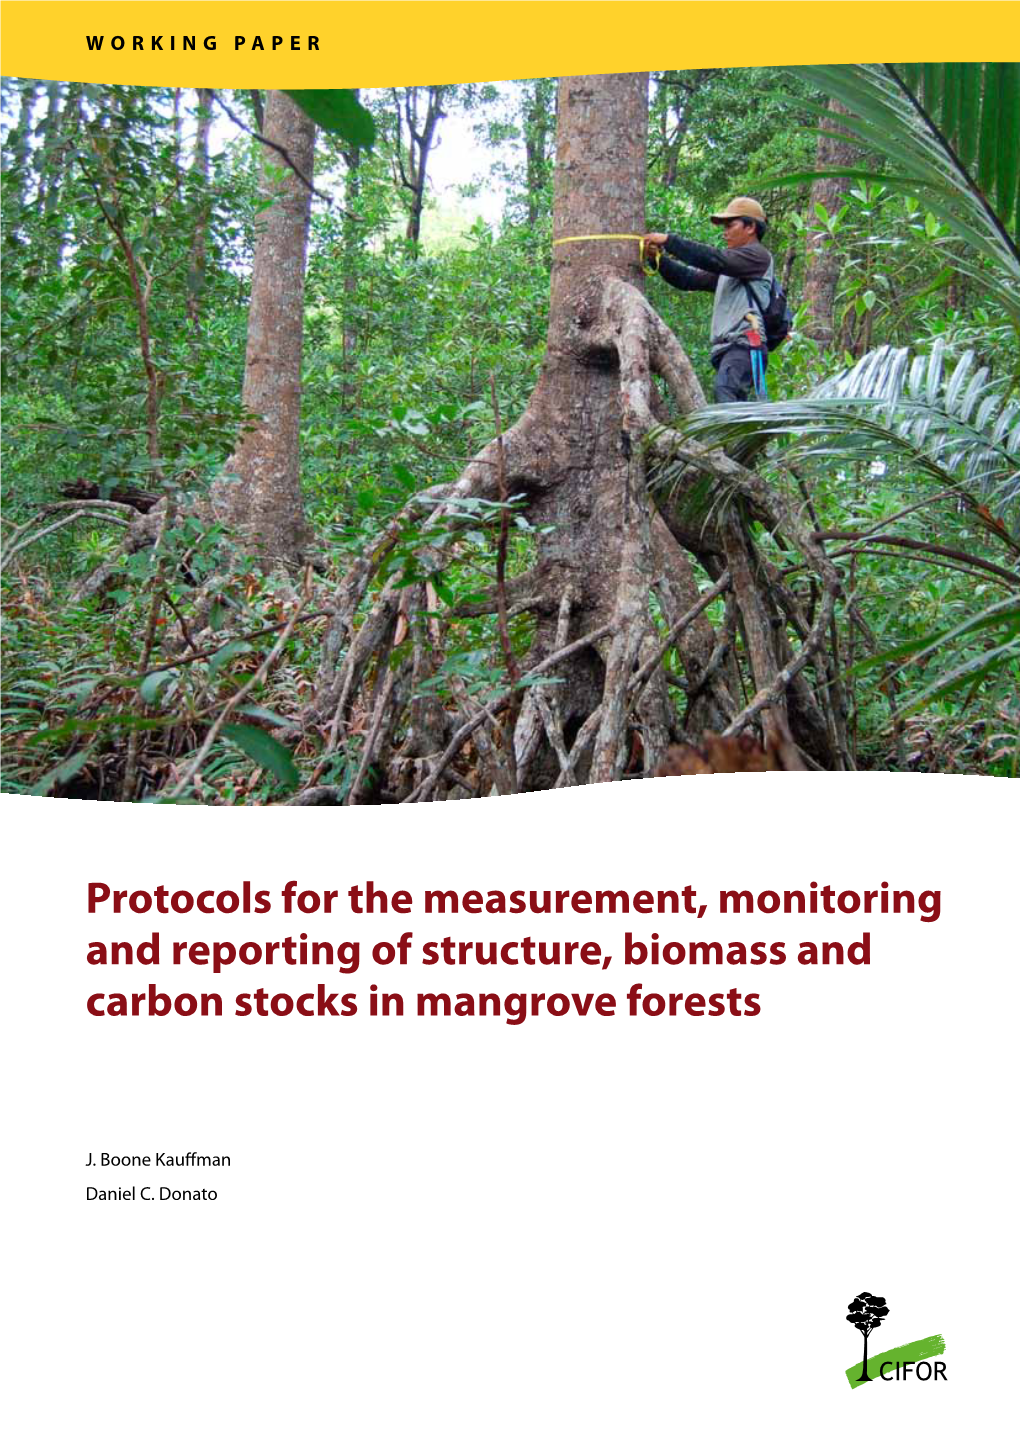 Protocols for the Measurement, Monitoring and Reporting of Structure, Biomass and Carbon Stocks in Mangrove Forests